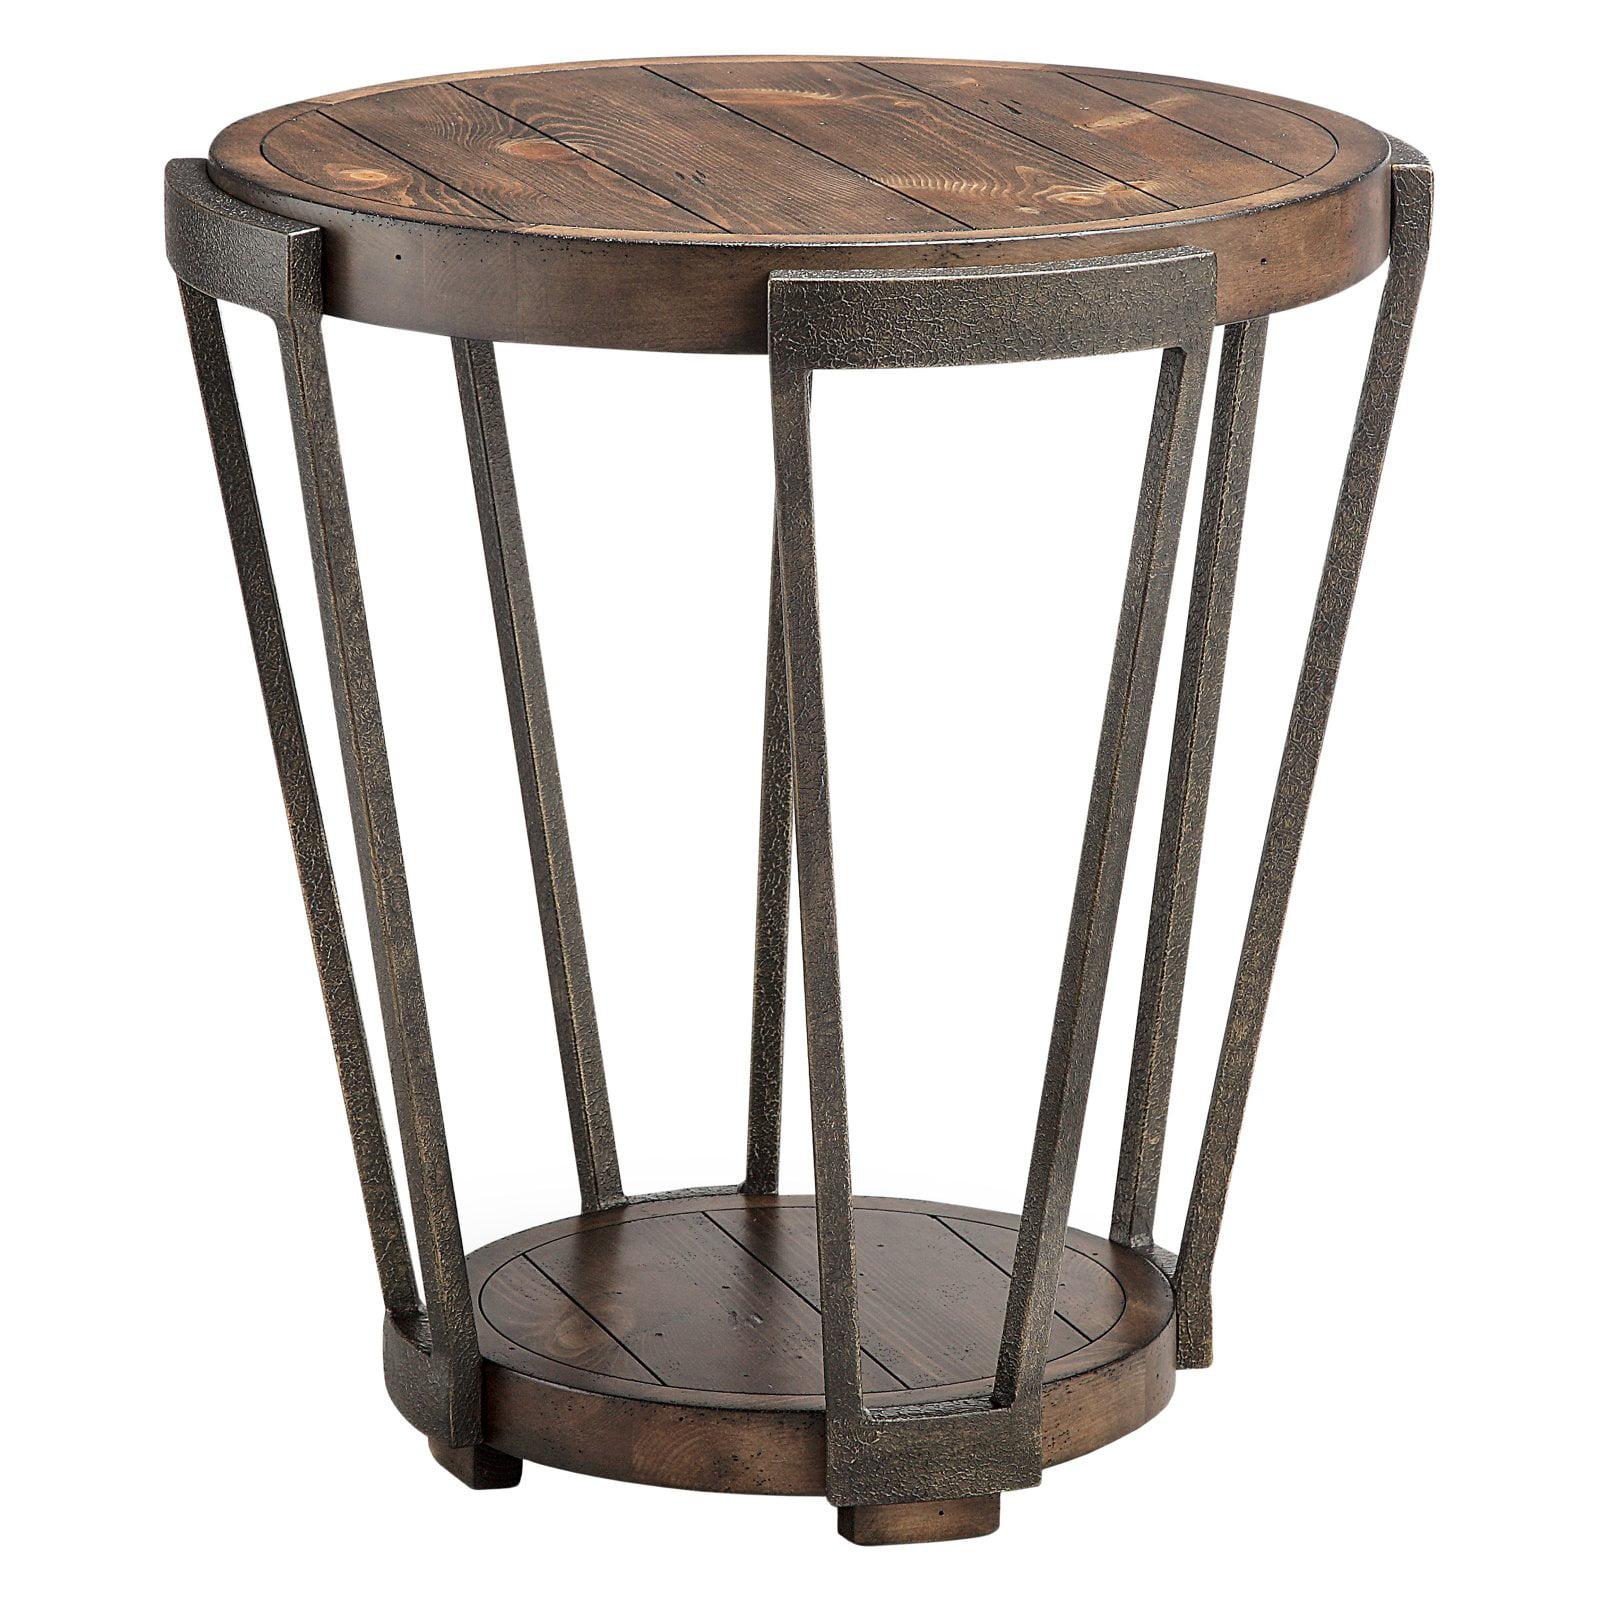 Rustic Bourbon and Aged Iron Round End Table, 22.5"